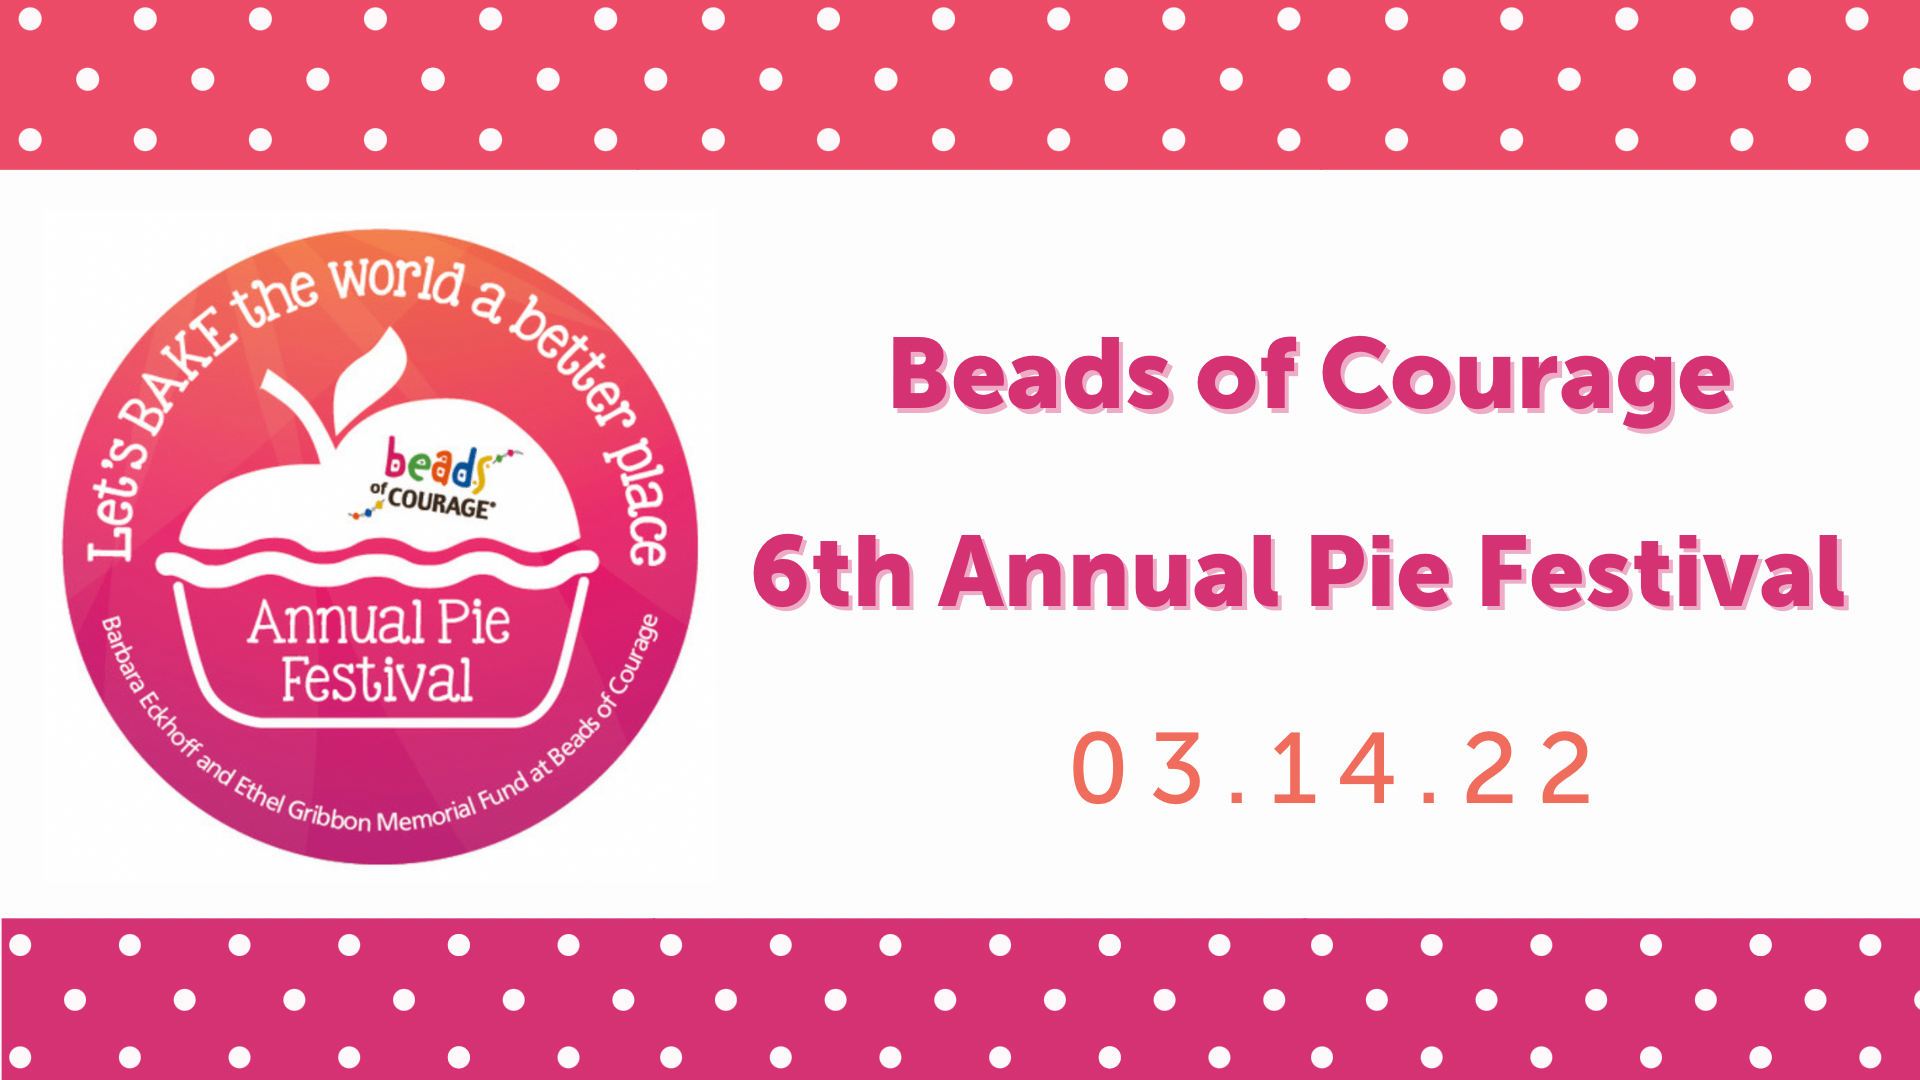 Pie Festival, Beads of Courage